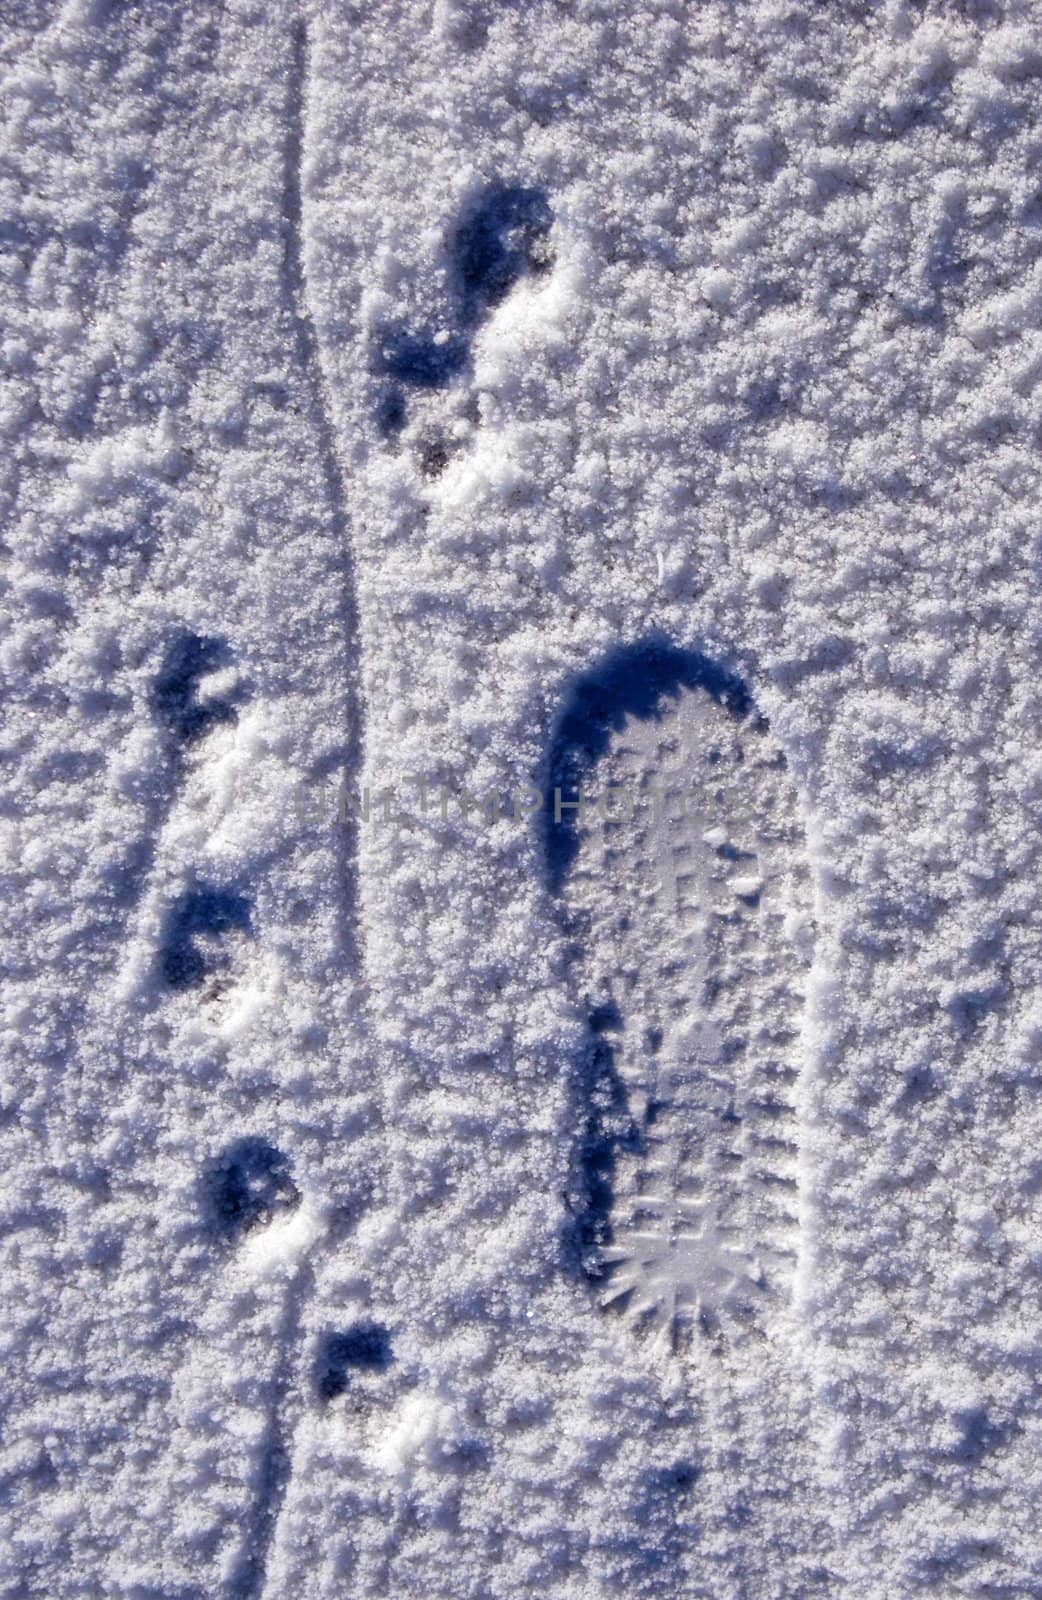 Man came here with his four-legged friend. Traces on snow.